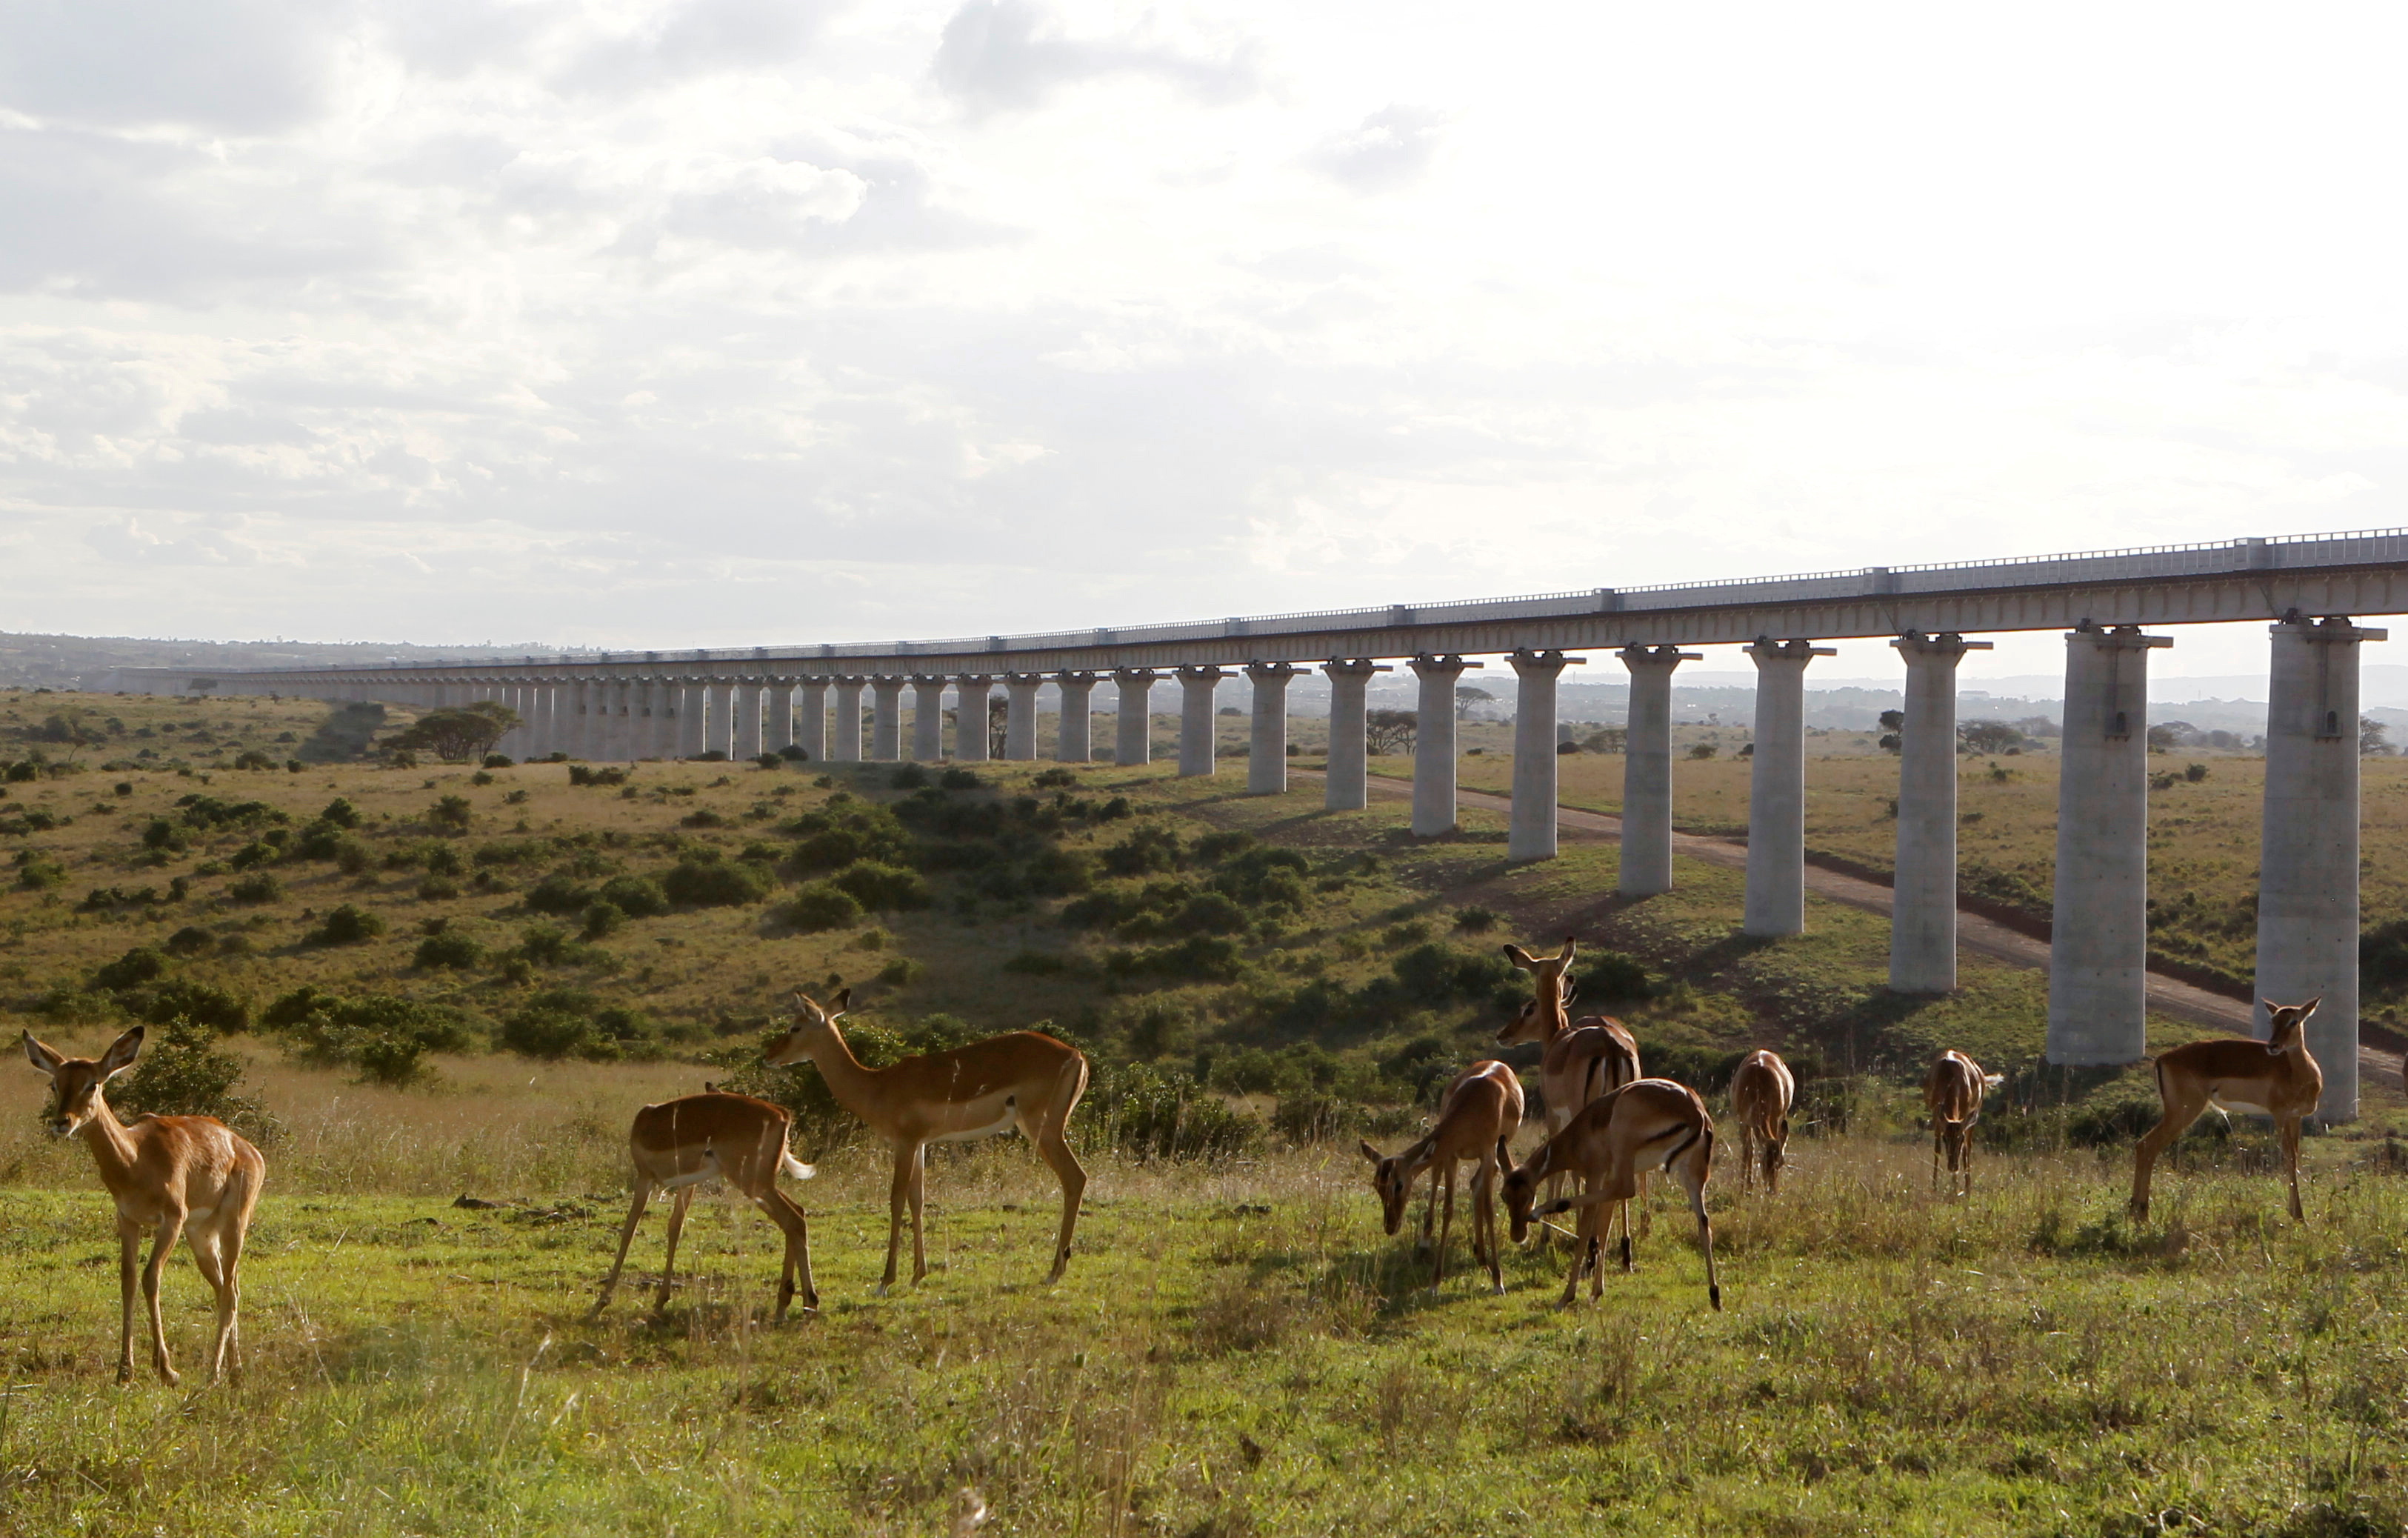 A group of impala graze near the elevated railway line that allows movement of animals below the Standard Gauge Railway line linking Nairobi and Naivasha inside the Nairobi national park in Nairobi